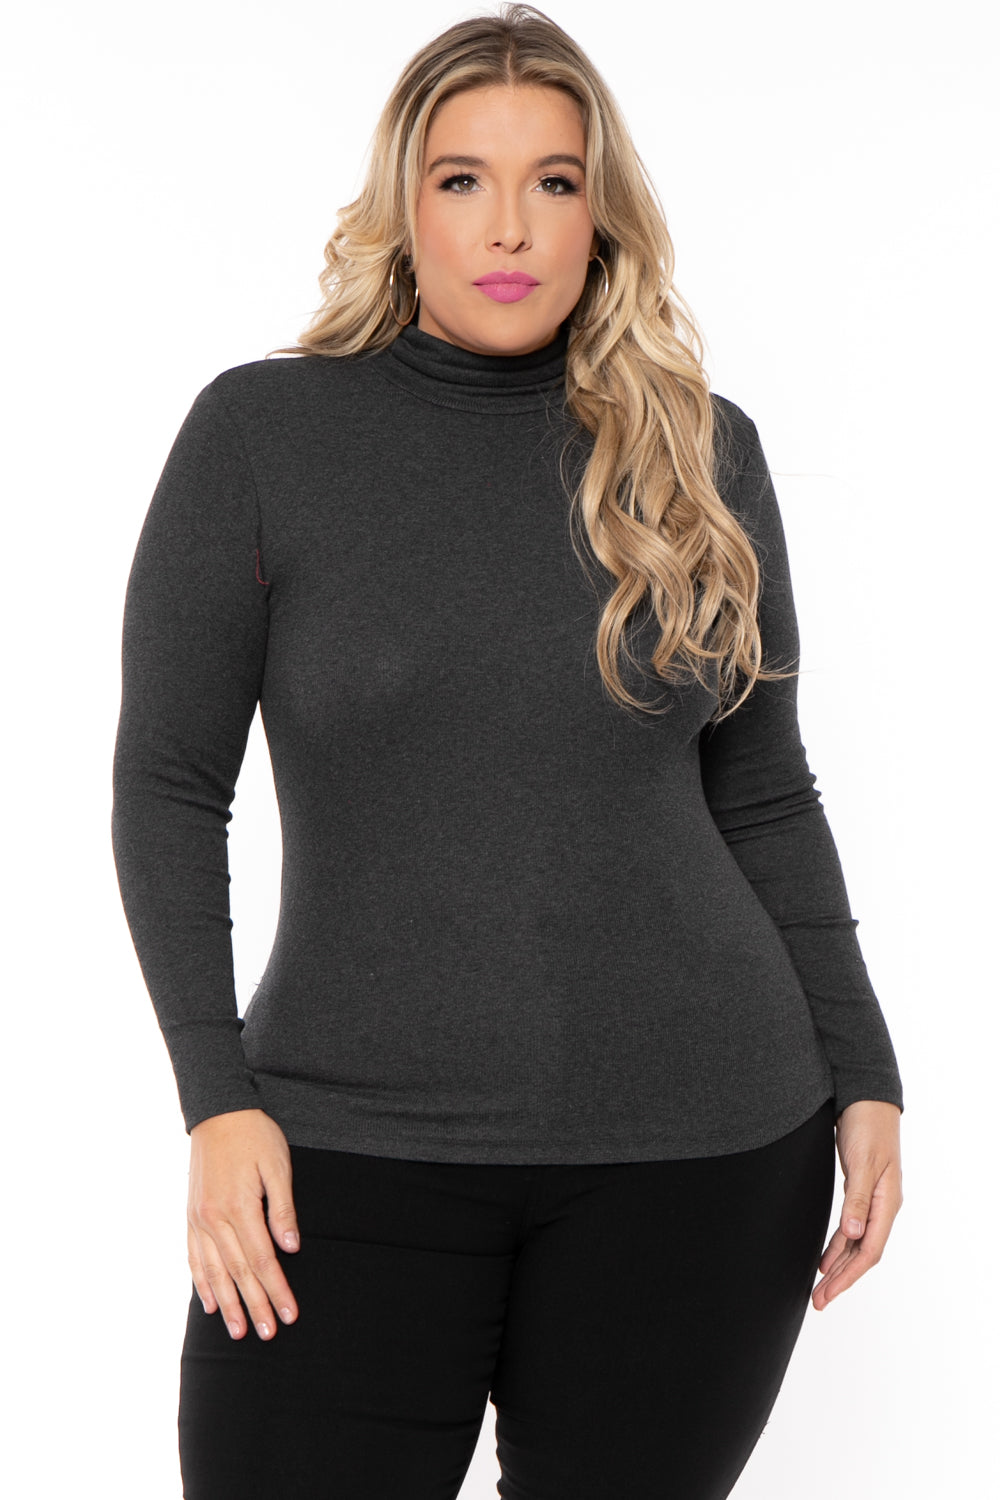 Ambiance Tops 1X / Charcoal Plus Size Ribbed Turtleneck Top - Charcoal